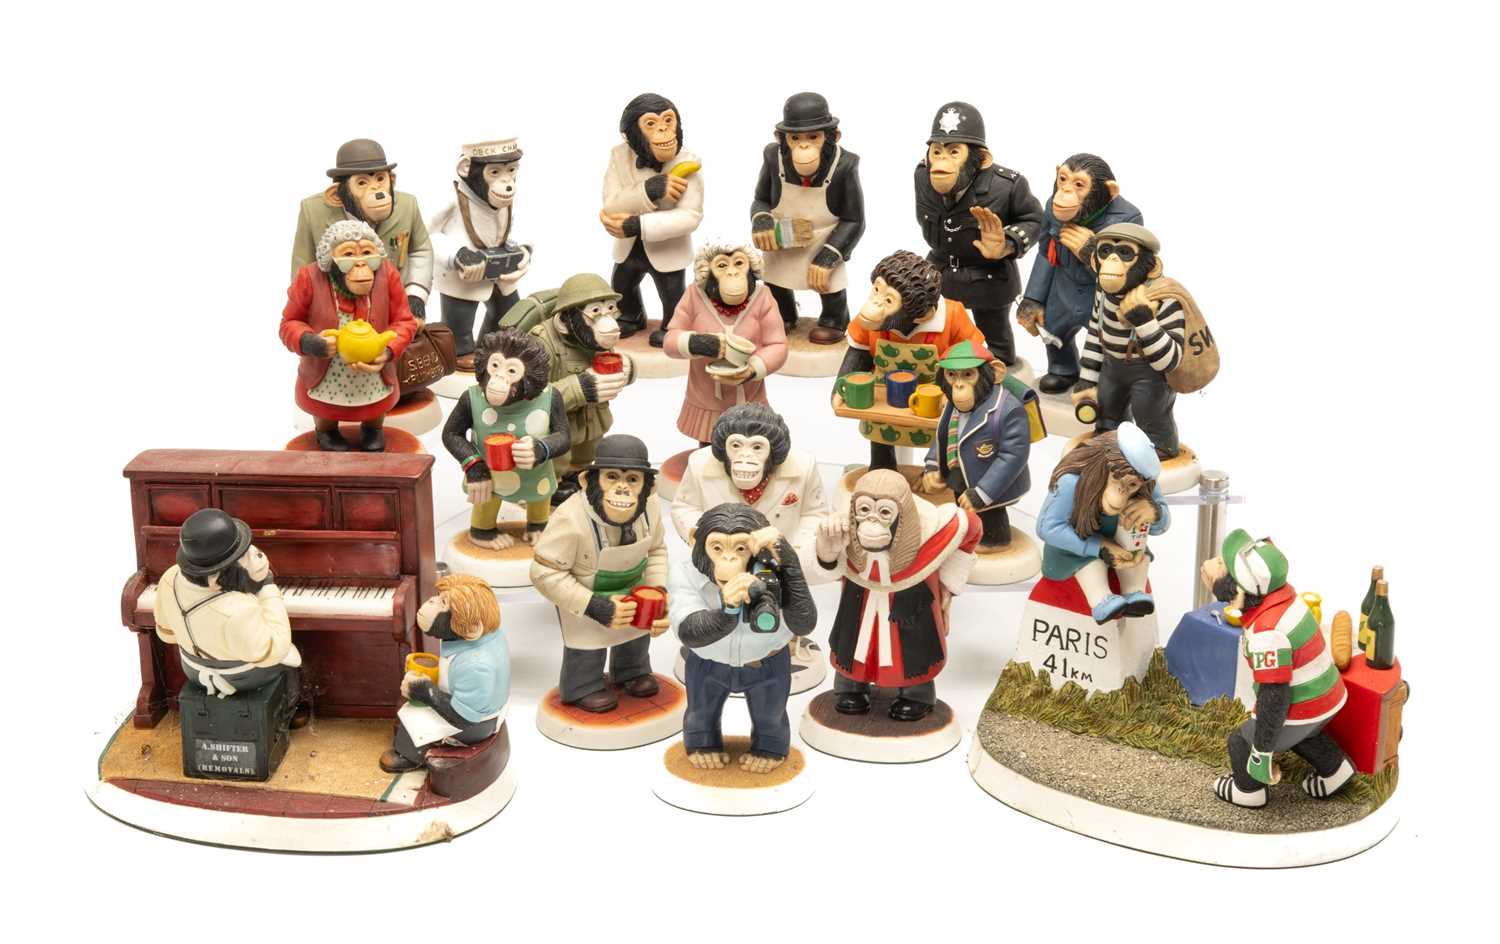 ASSORTED RESIN BROOKE BOND 'PG TIPS' CHIMPANZEE CHARACTER FIGURES/GROUPS (19) Provenance: private